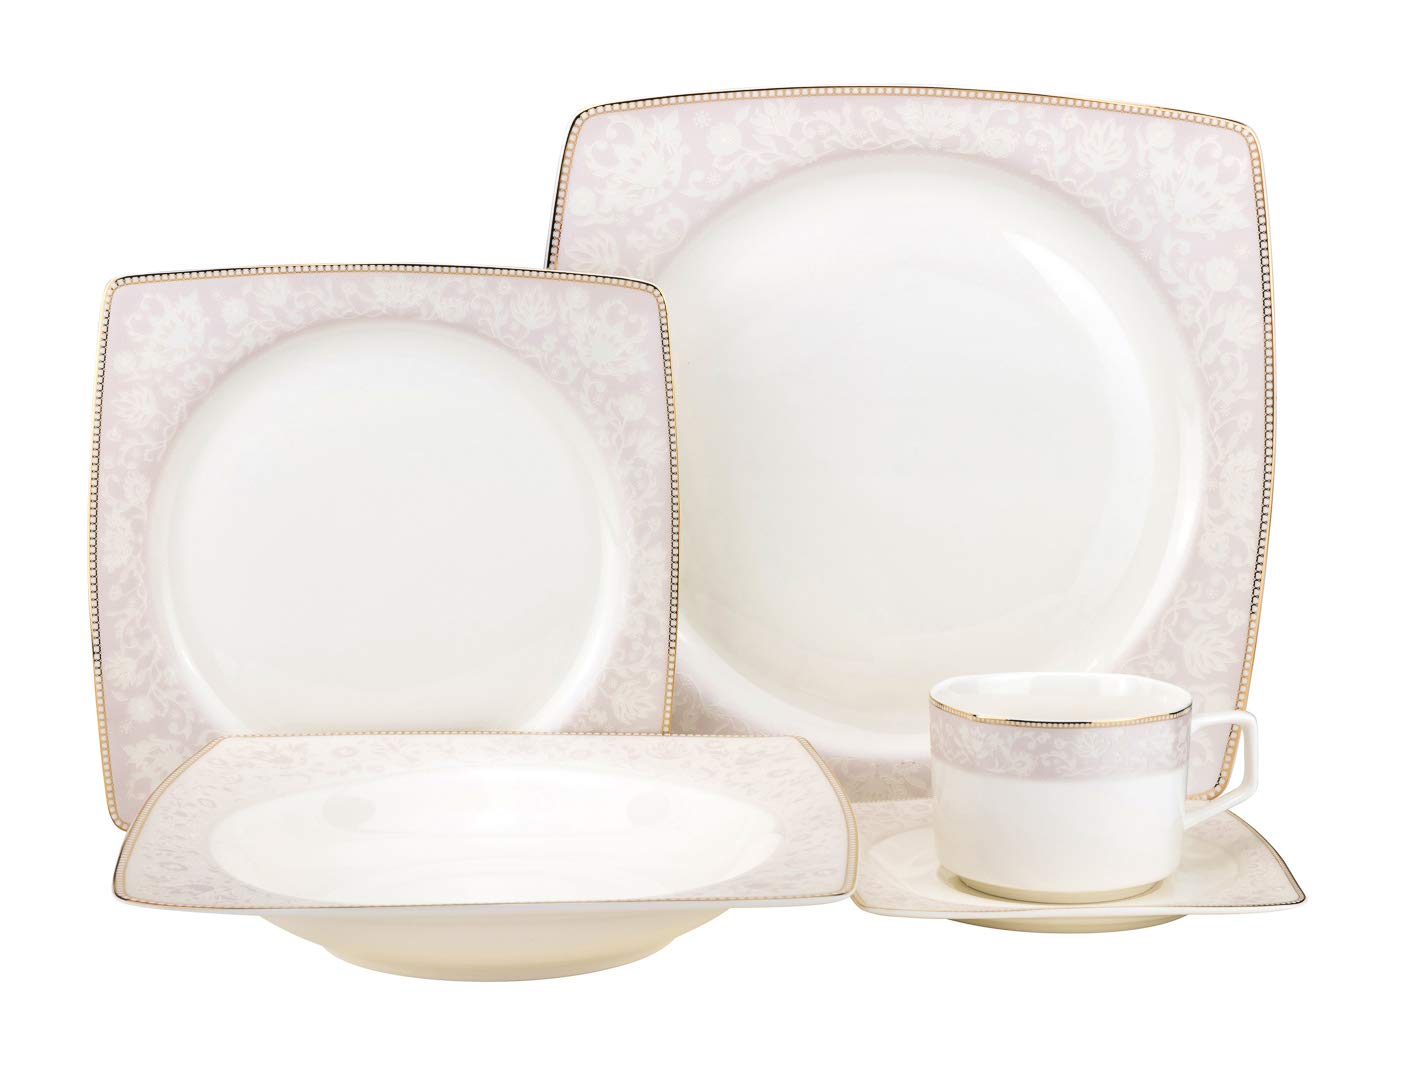 20-pc. Dinner Set Service for 4, 24K Gold-plated Luxury Bone China Tableware ("Wedding Band Gold" 6449-20) - image 2 of 2